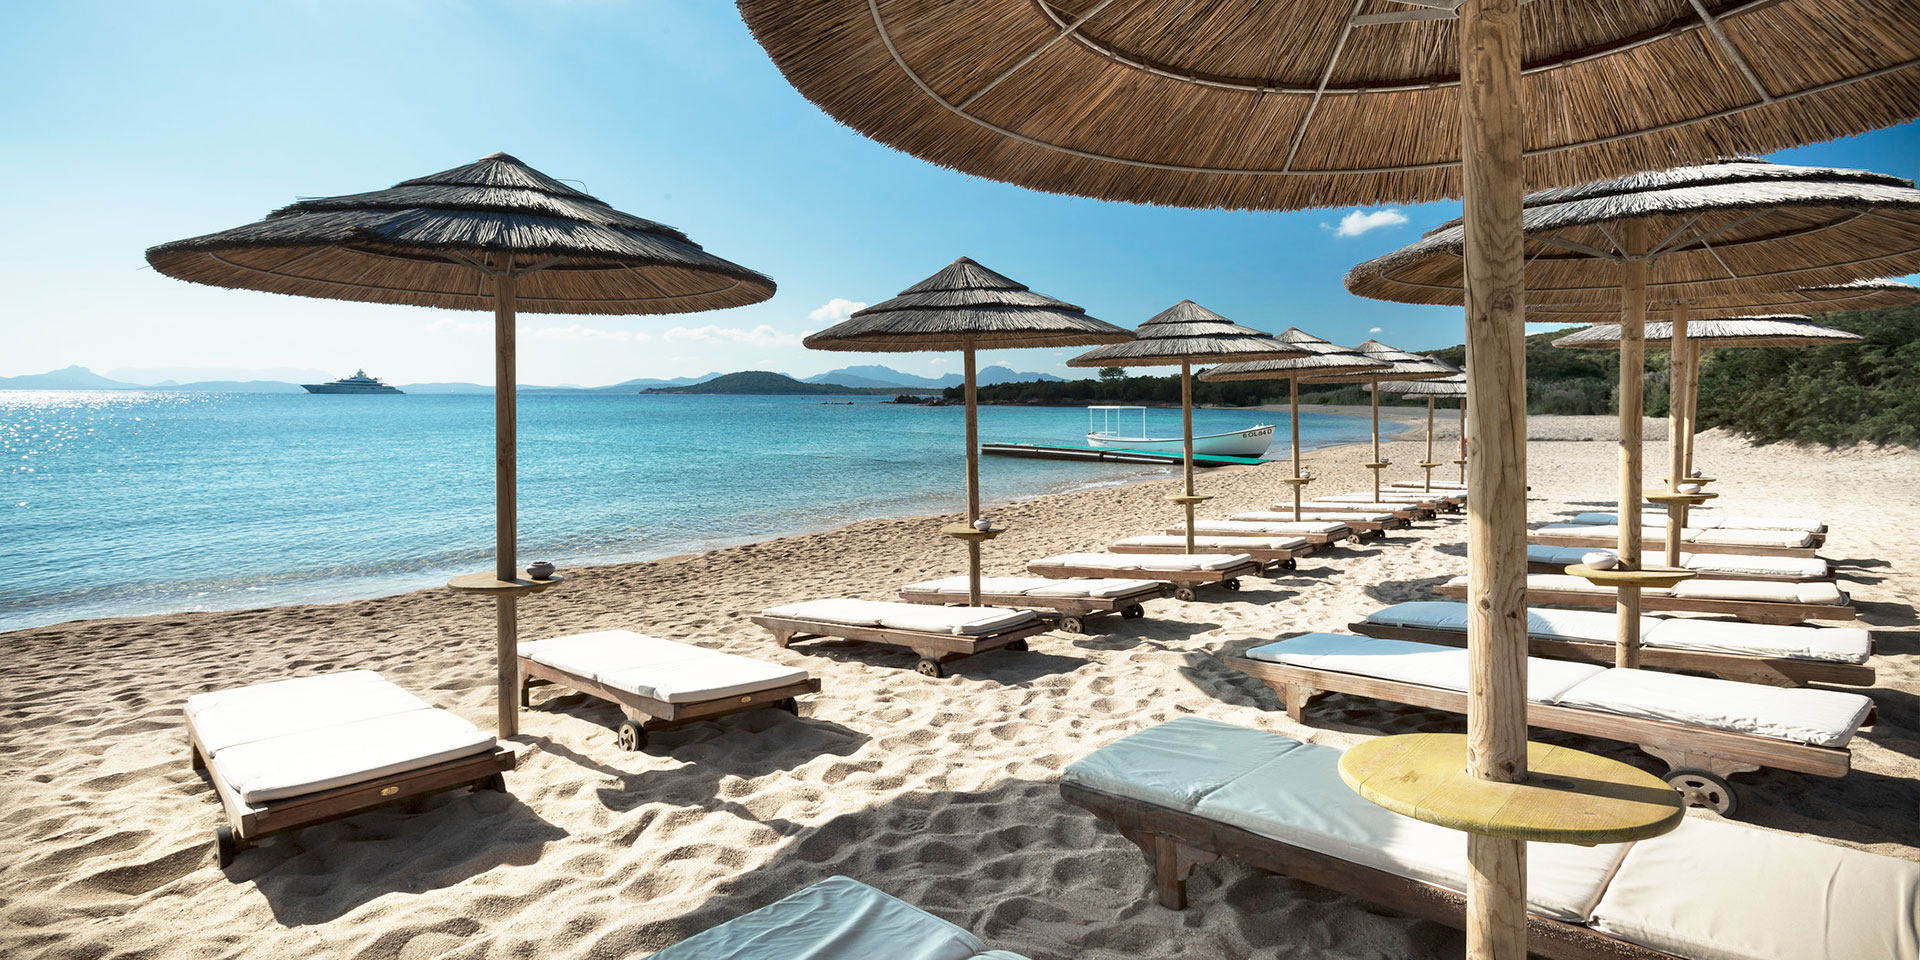 48 Hours of Total Well-Being on Italy’s Costa Smeralda